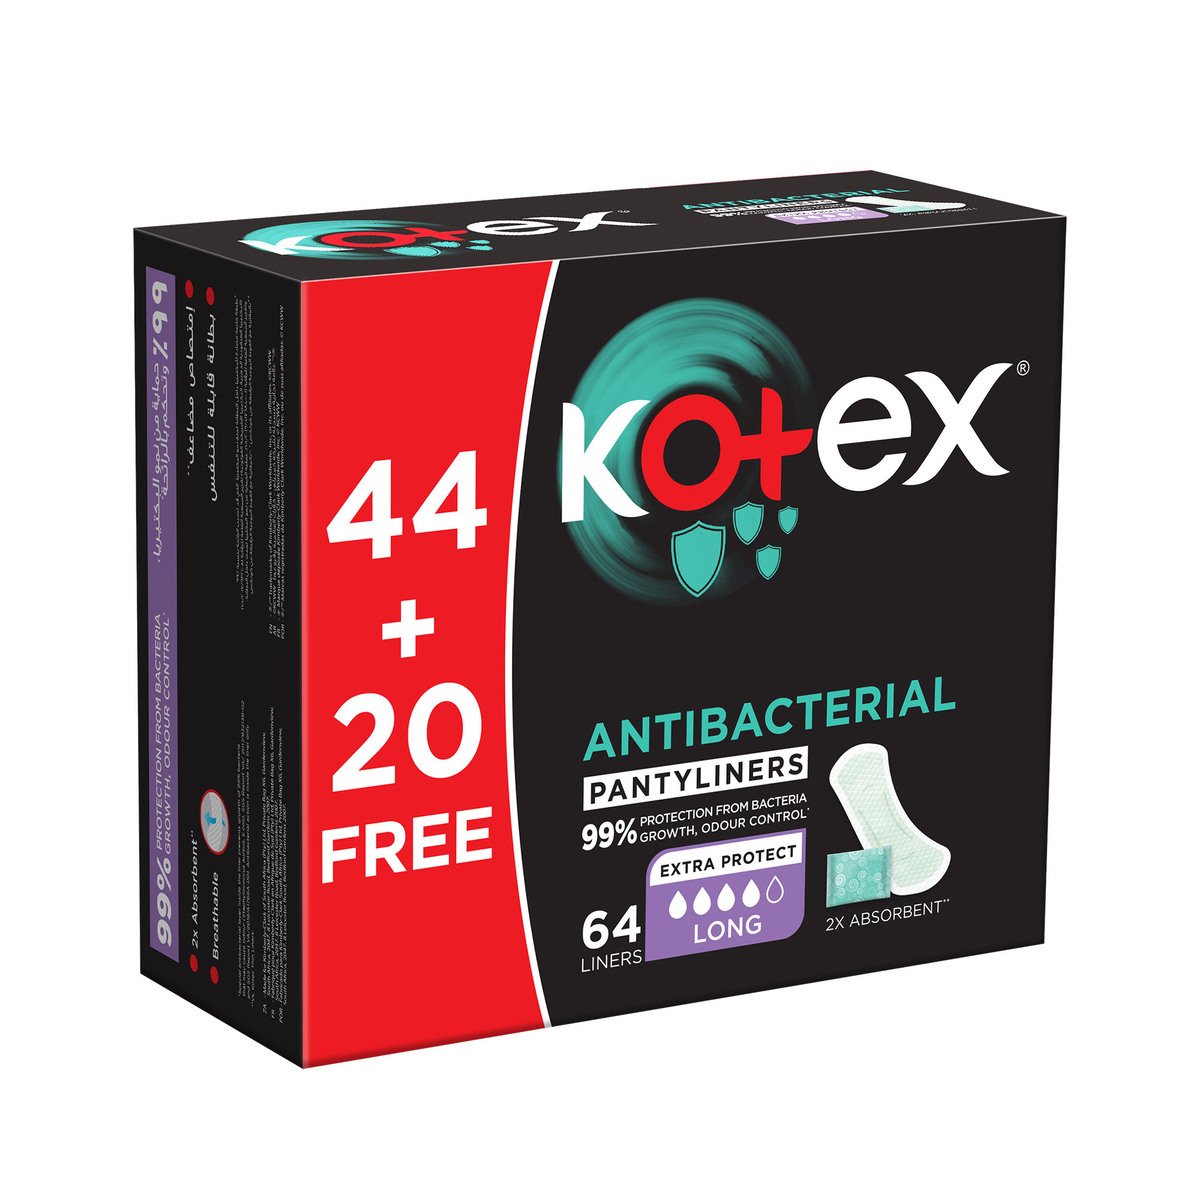 Kotex Antibacterial Panty Liners 99% Protection from Bacteria Growth Long Size 64 pcs